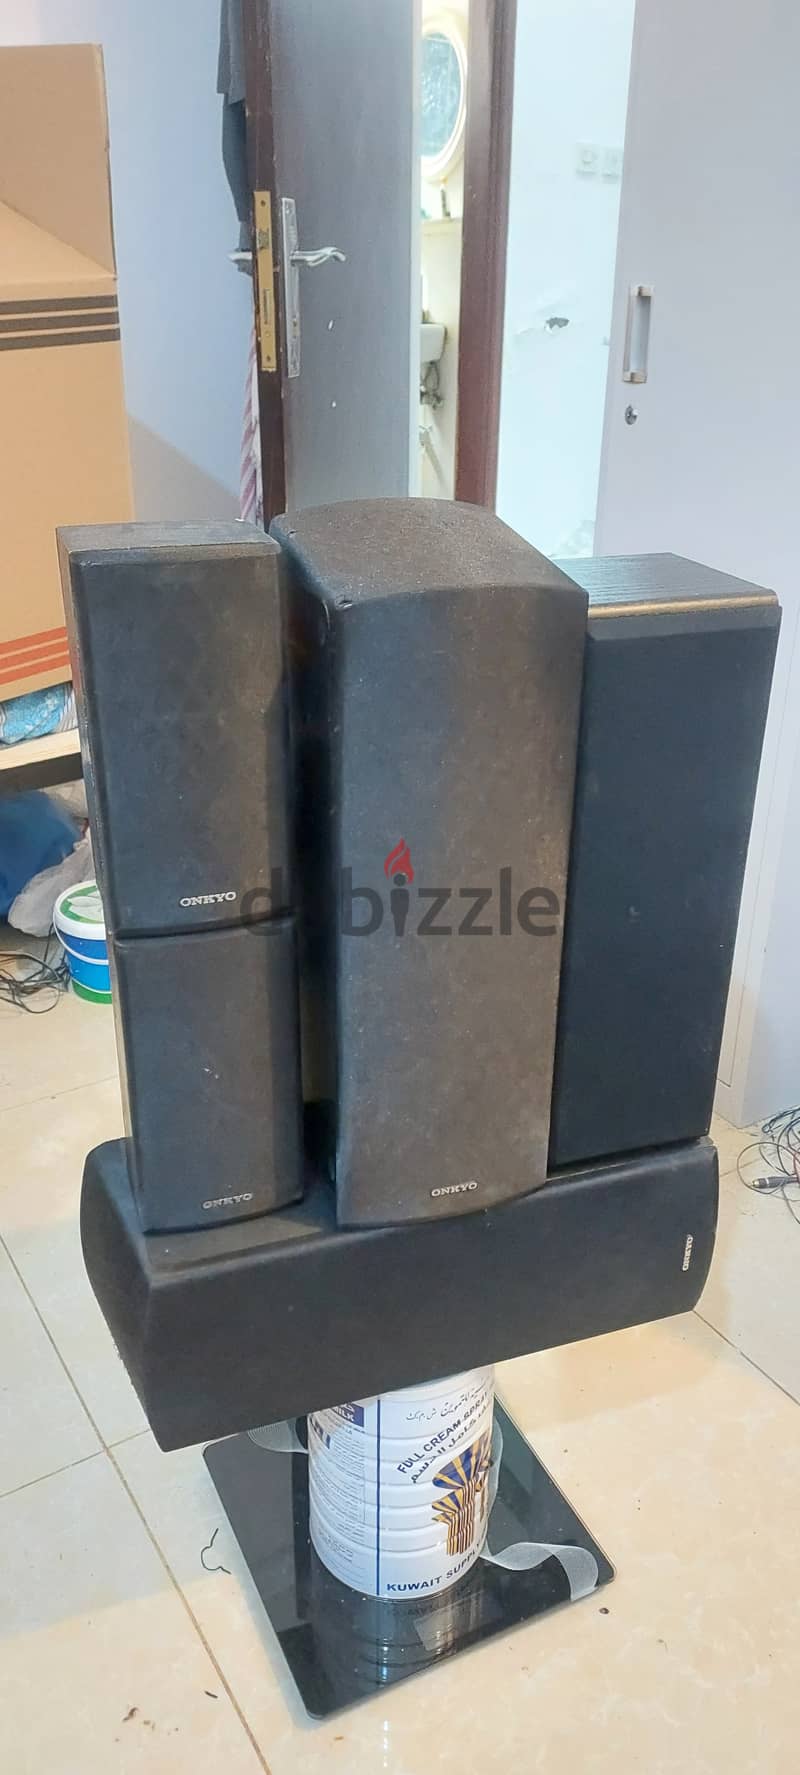 5 pieces of ONKYO Home Theater Speakers (130W 6 Ohm's )for sale. 1